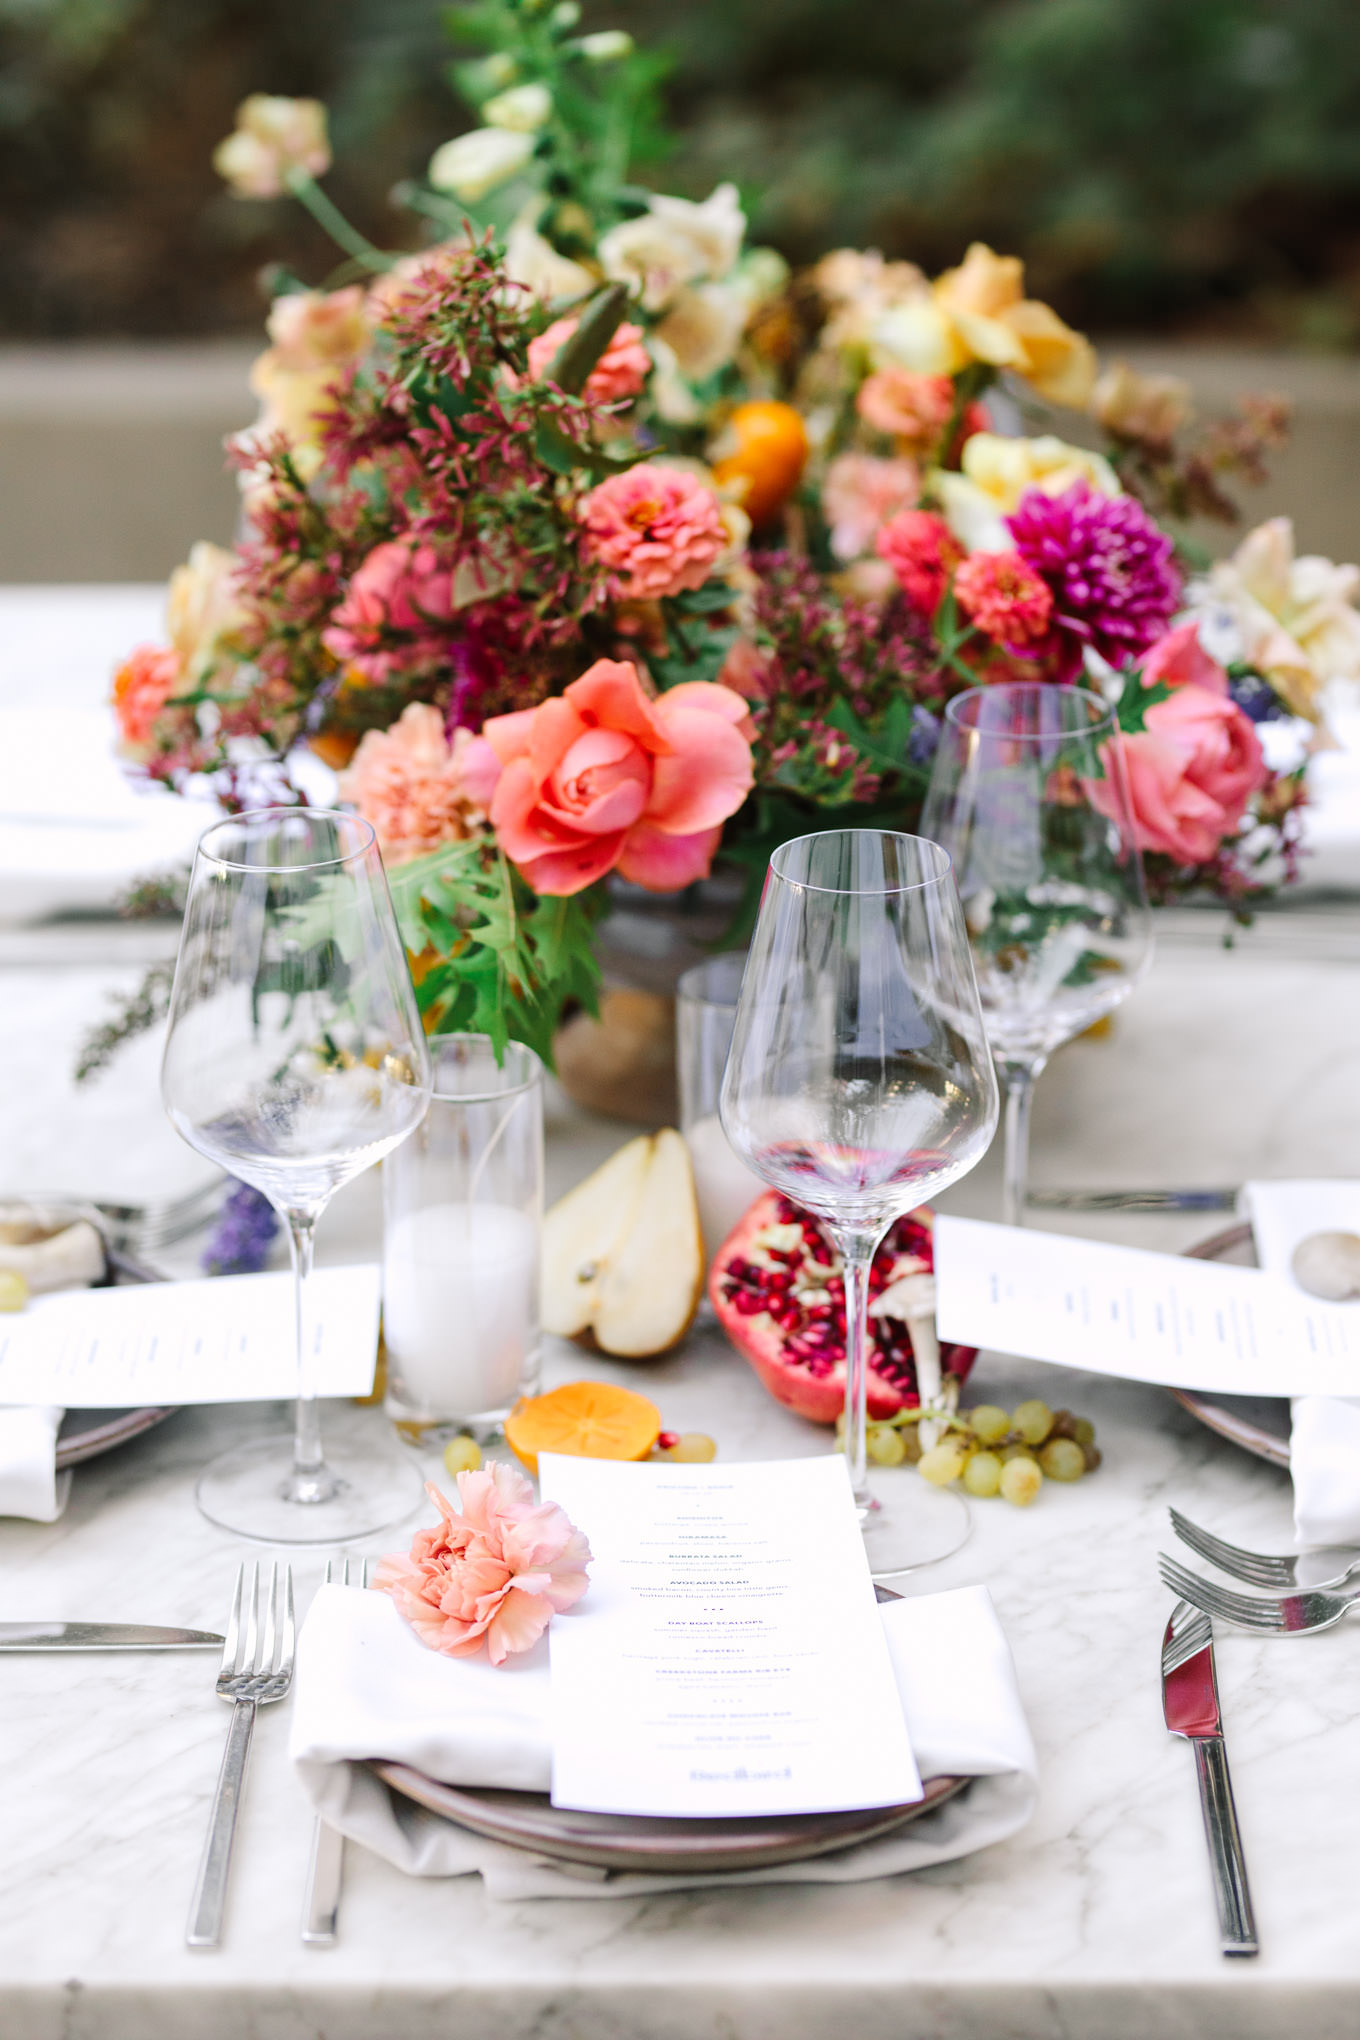 Table display at Redbird Los Angeles | Engagement, elopement, and wedding photography roundup of Mary Costa’s favorite images from 2020 | Colorful and elevated photography for fun-loving couples in Southern California | #2020wedding #elopement #weddingphoto #weddingphotography #microwedding   Source: Mary Costa Photography | Los Angeles